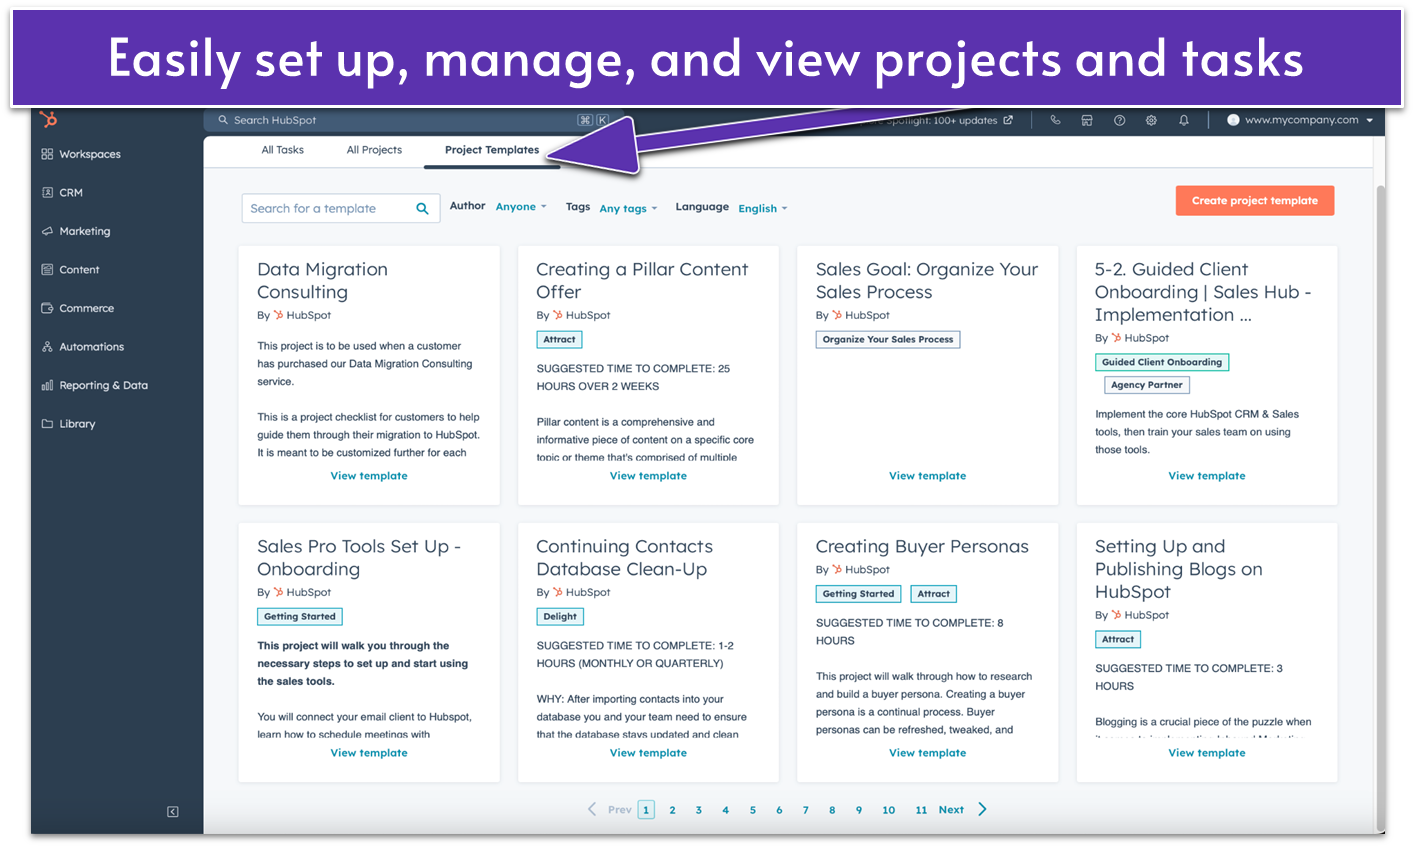 HubSpot templates and project and task views